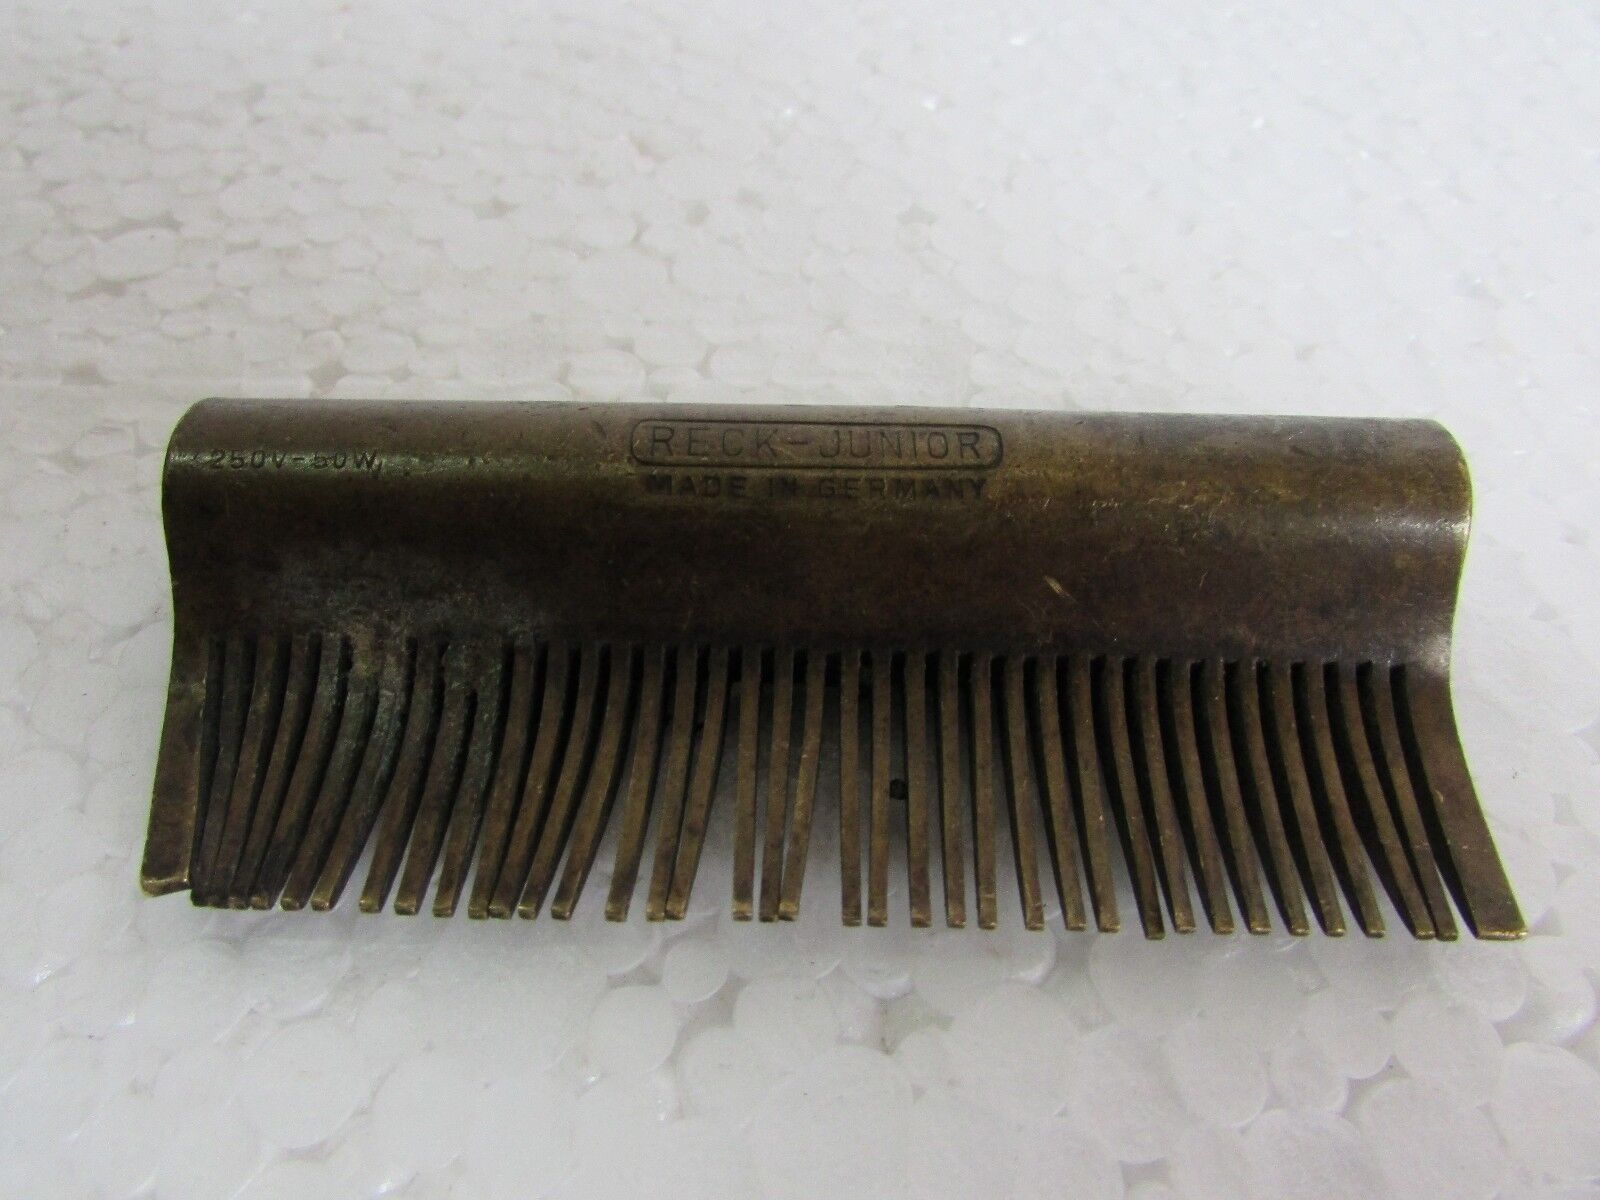 Vintage Old Rare Brass Hair Comb Reck Junior Made in Germany collectible  